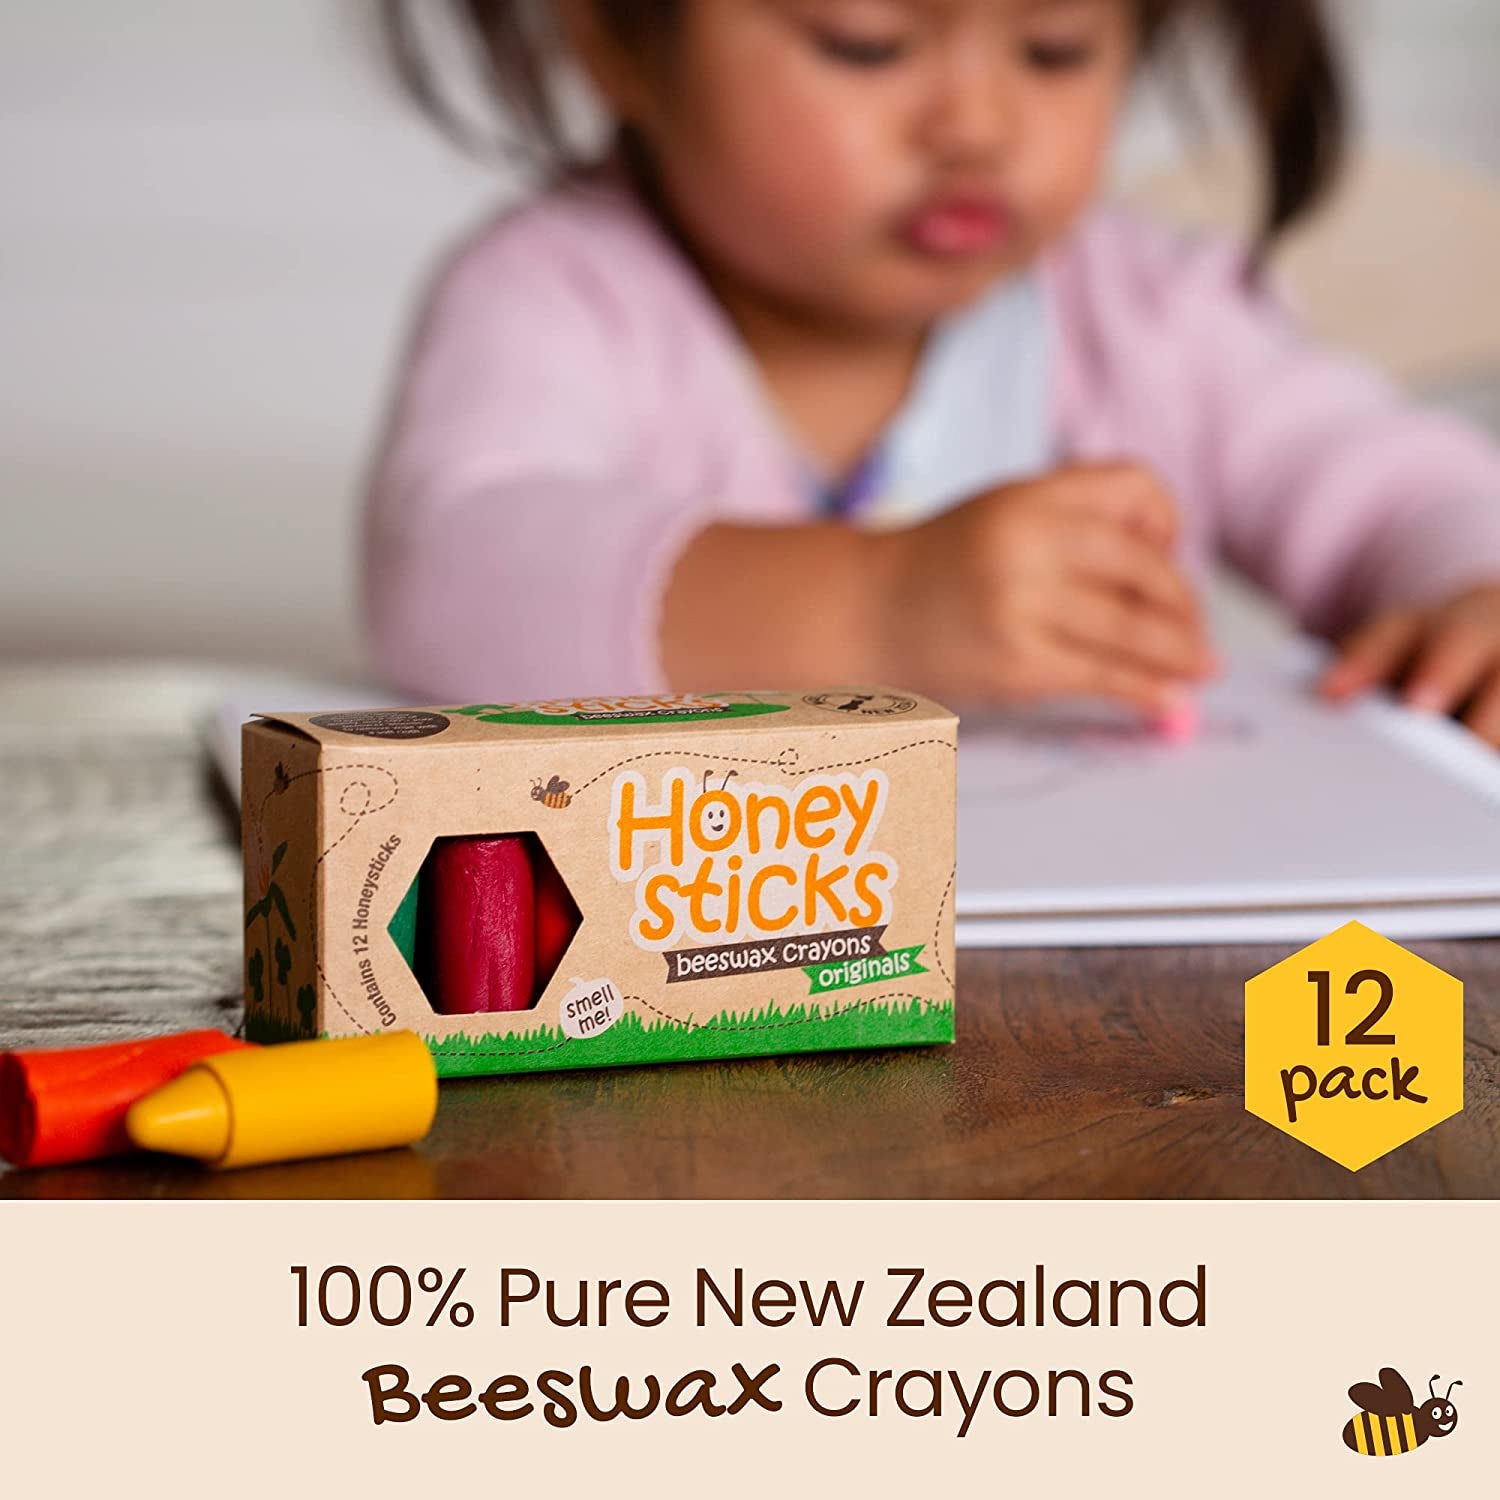 100% Pure Beeswax Crayons (12 Pack) - Non-Toxic Crayons, Safe for Babies and Toddlers, for 1 Year Plus, Handmade in New Zealand with Natural Beeswax and Food-Grade Colors, Eco-Friendly.